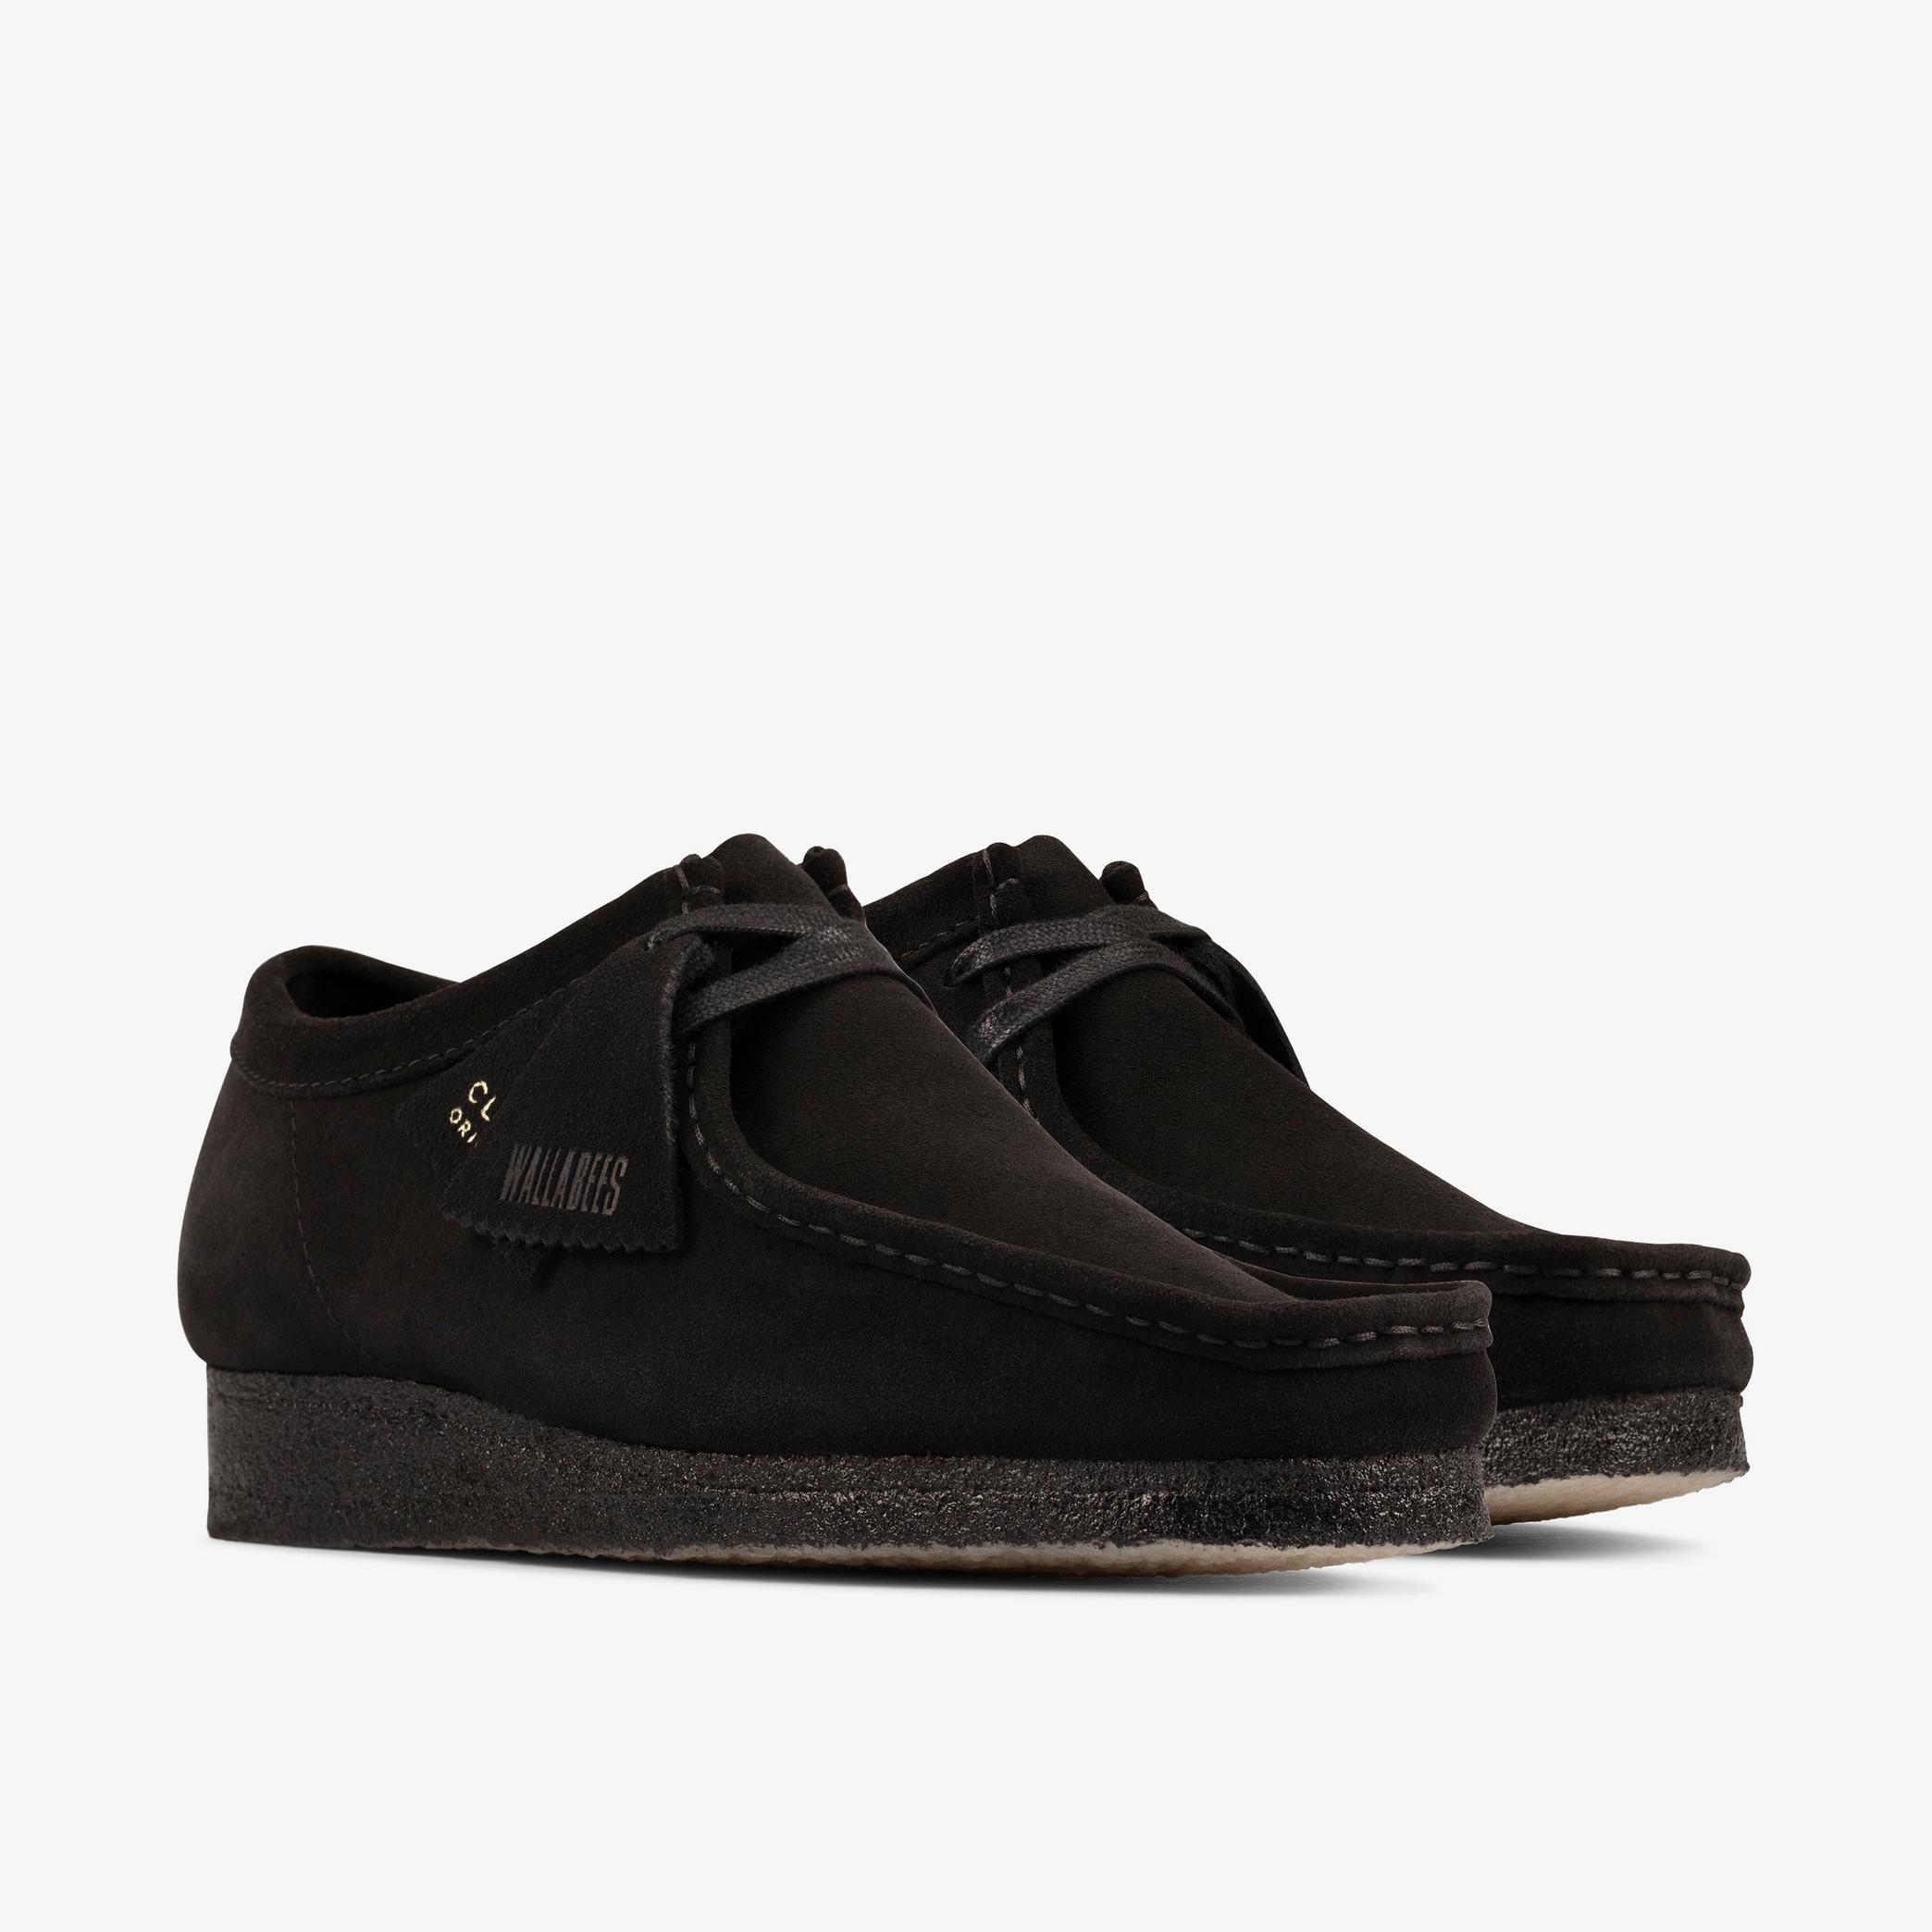 Wallabee Black Suede Shoes, view 4 of 6